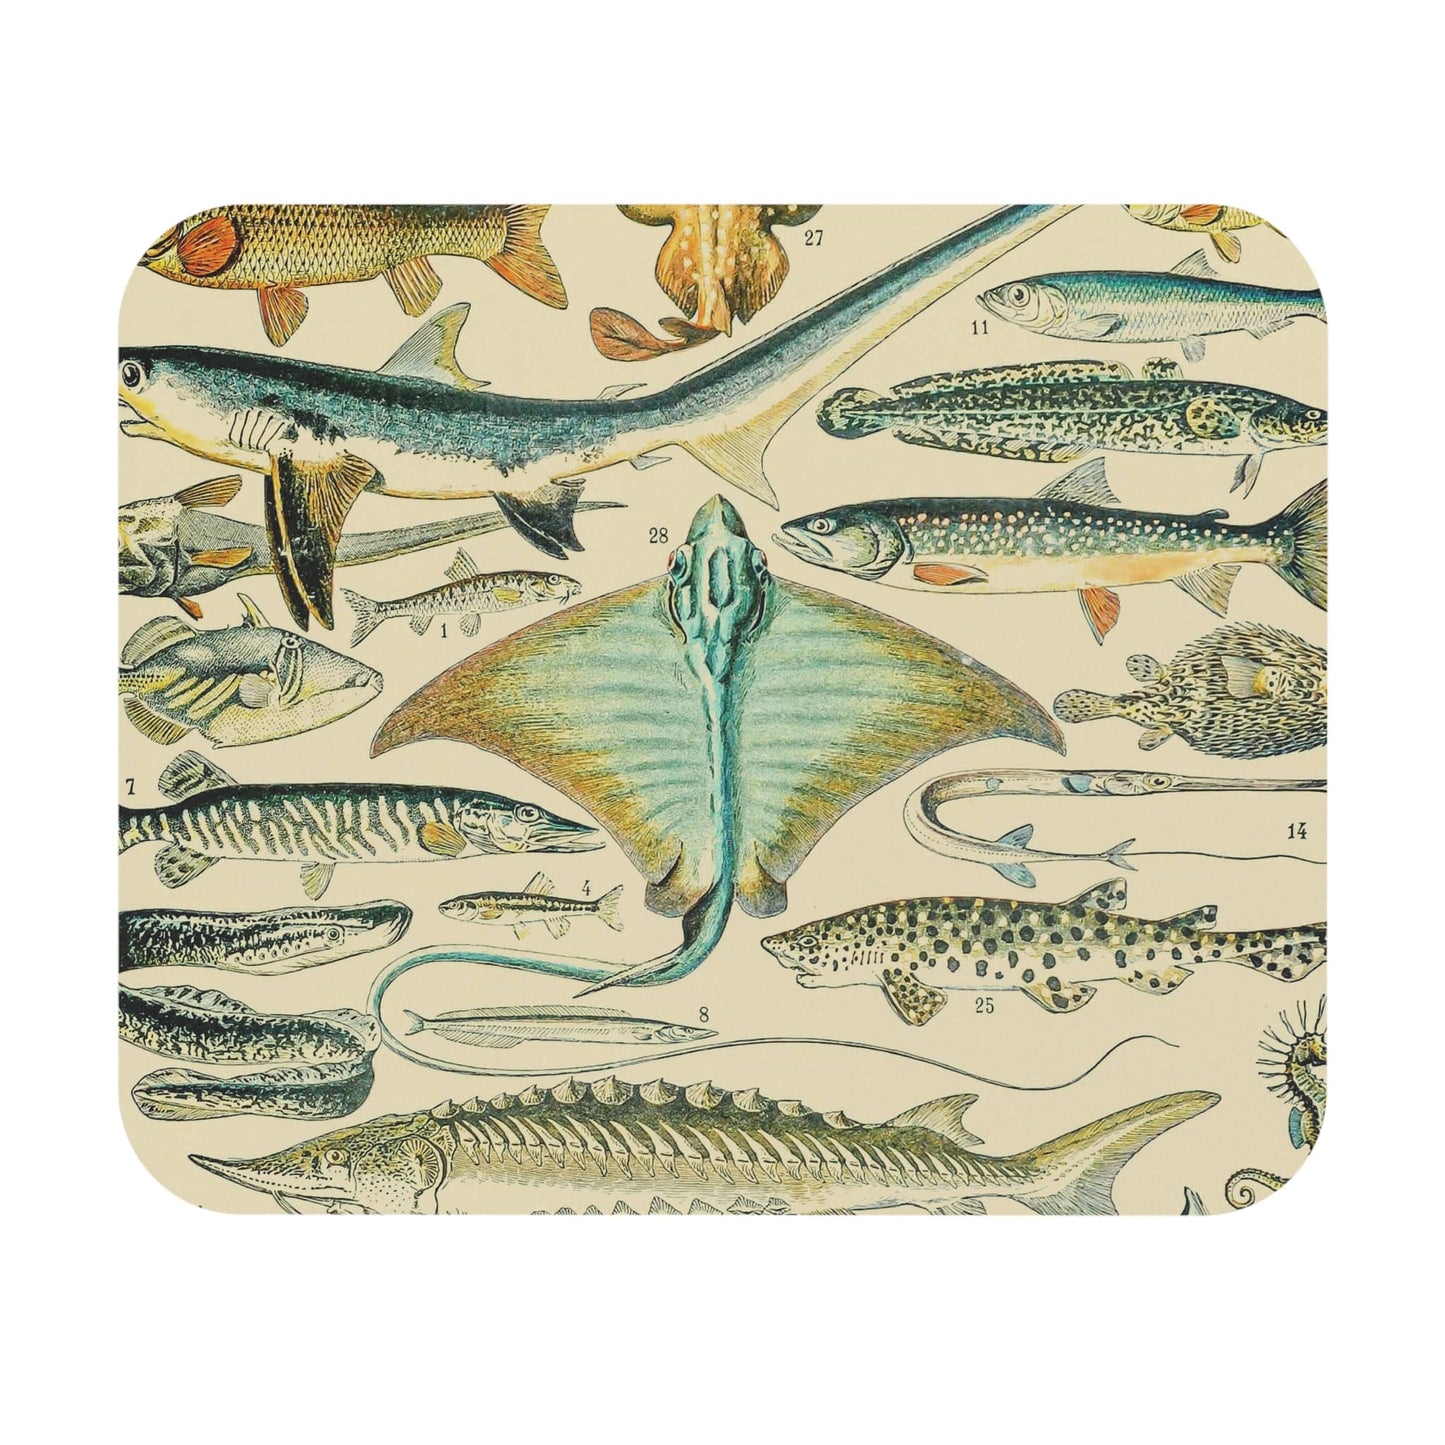 Fishing Mouse Pad highlighting types of fish art, enhancing desk and office decor.